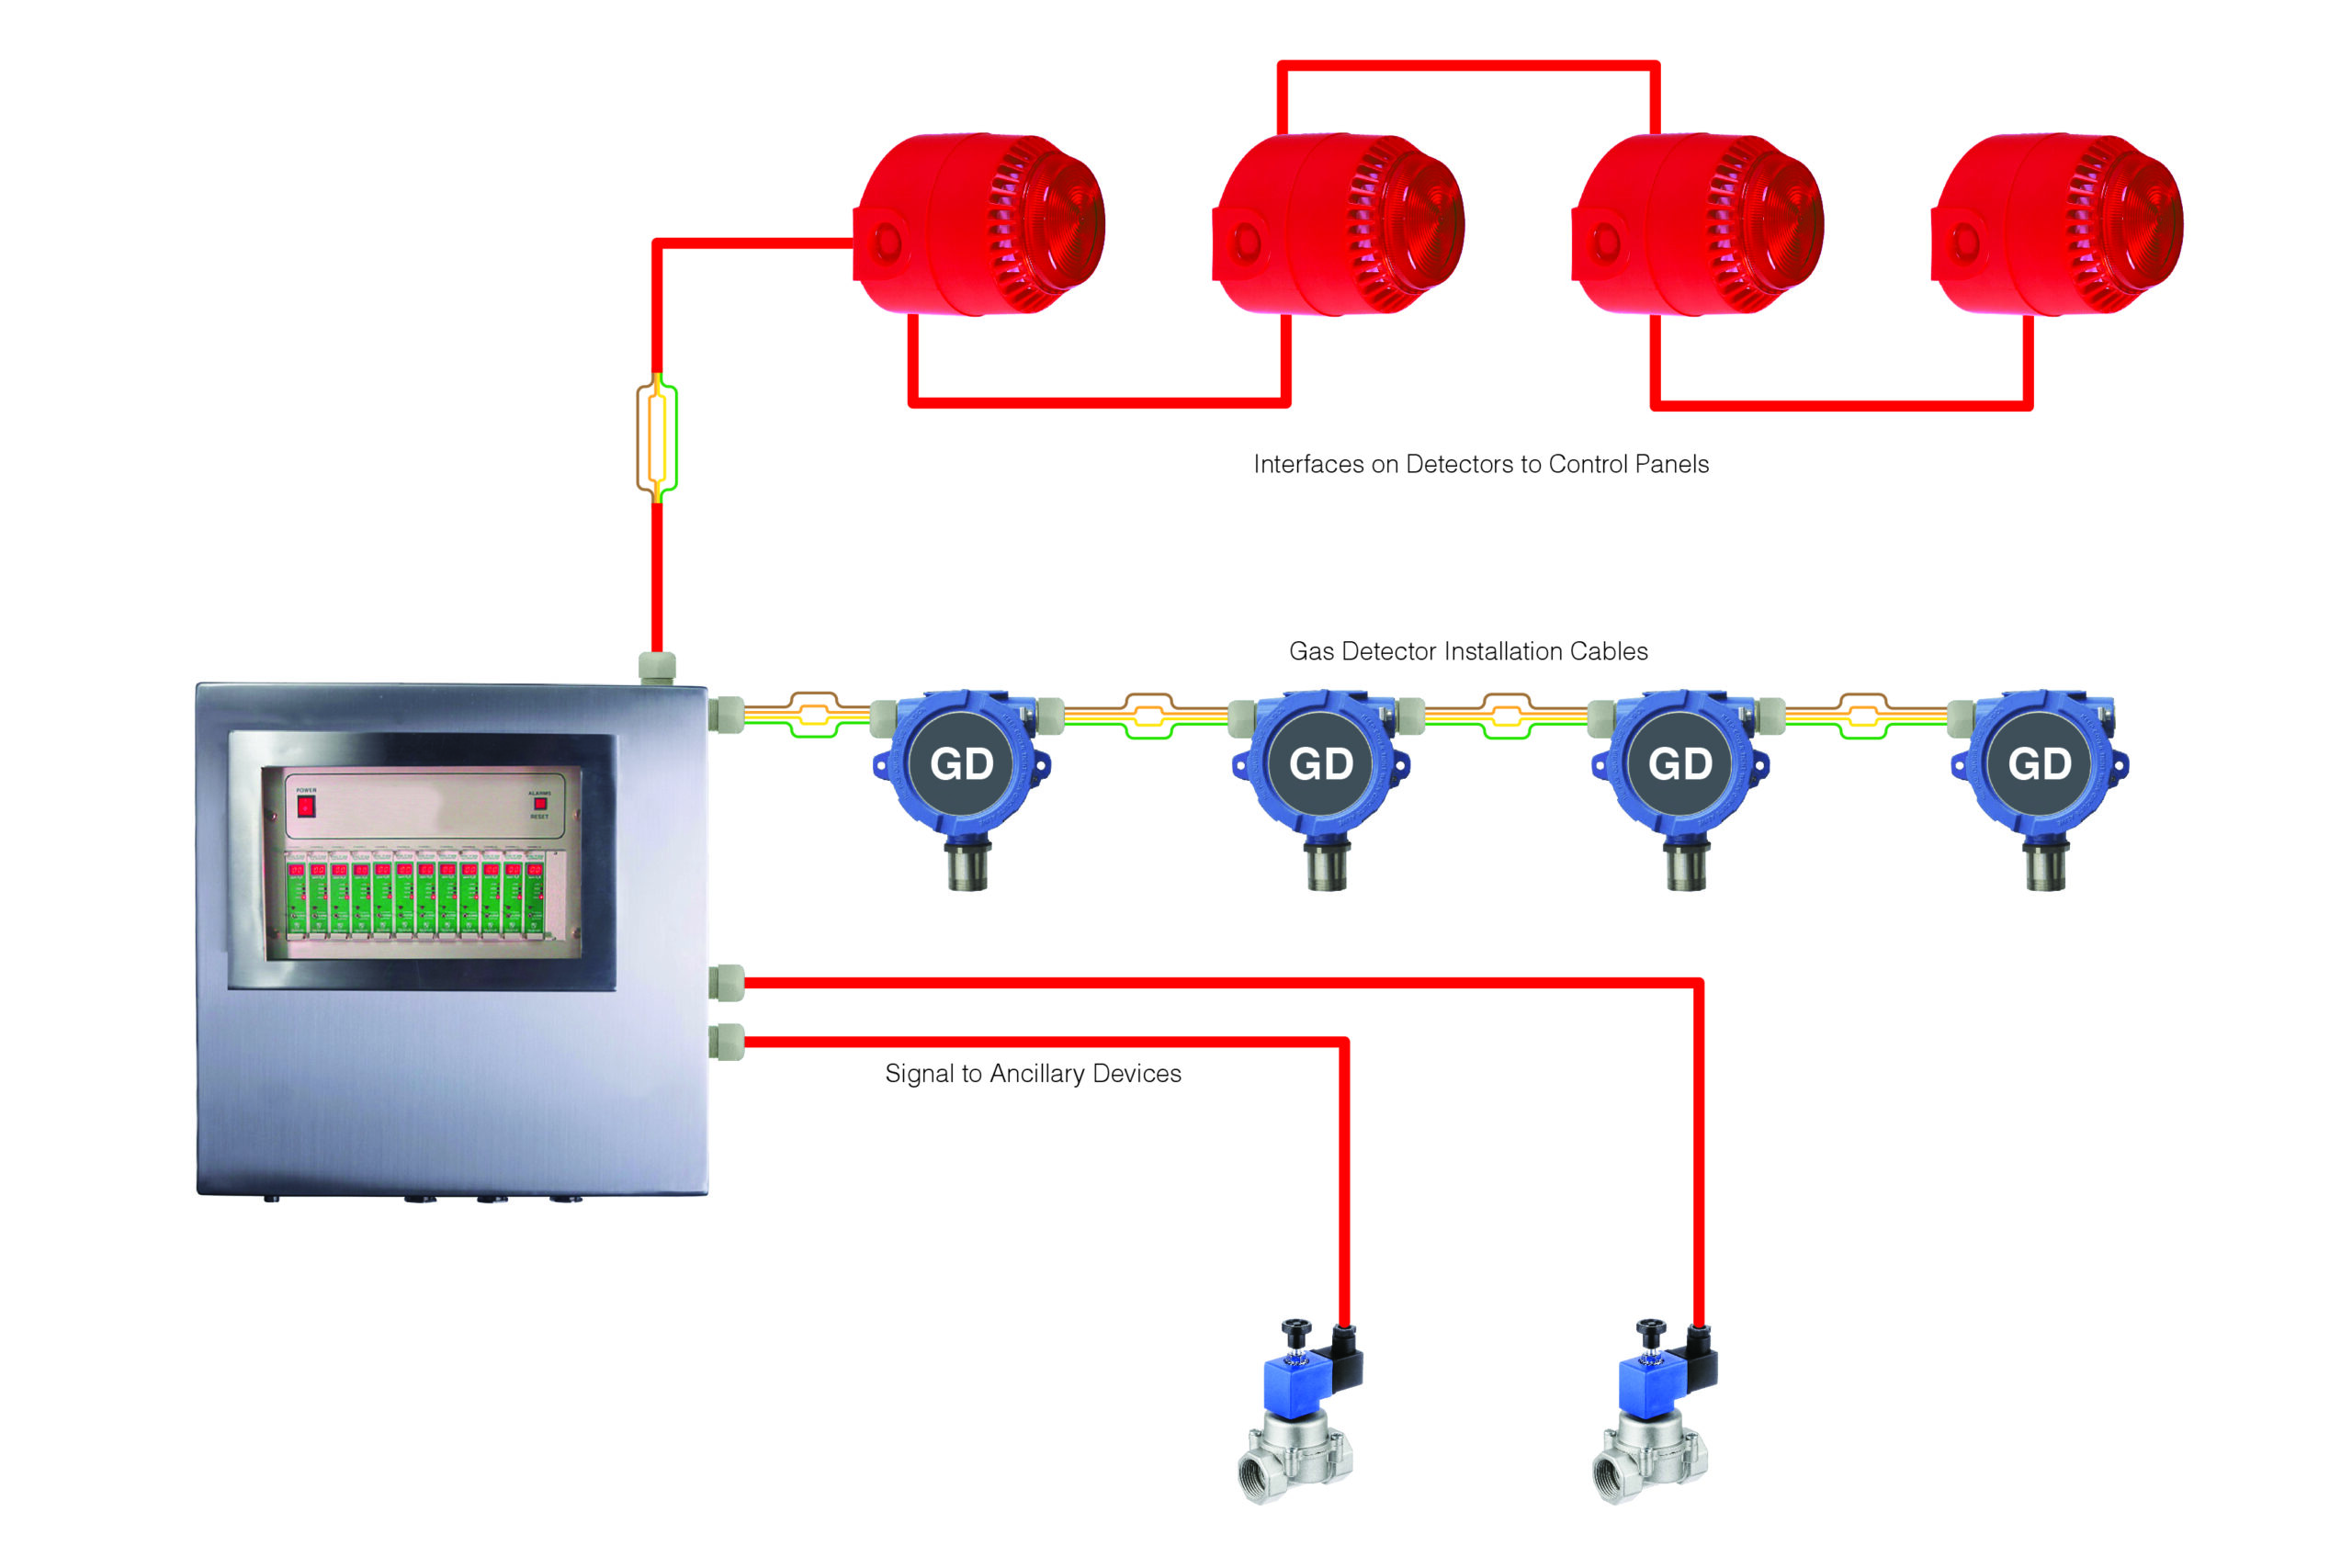 a typical 4-wire addressable system